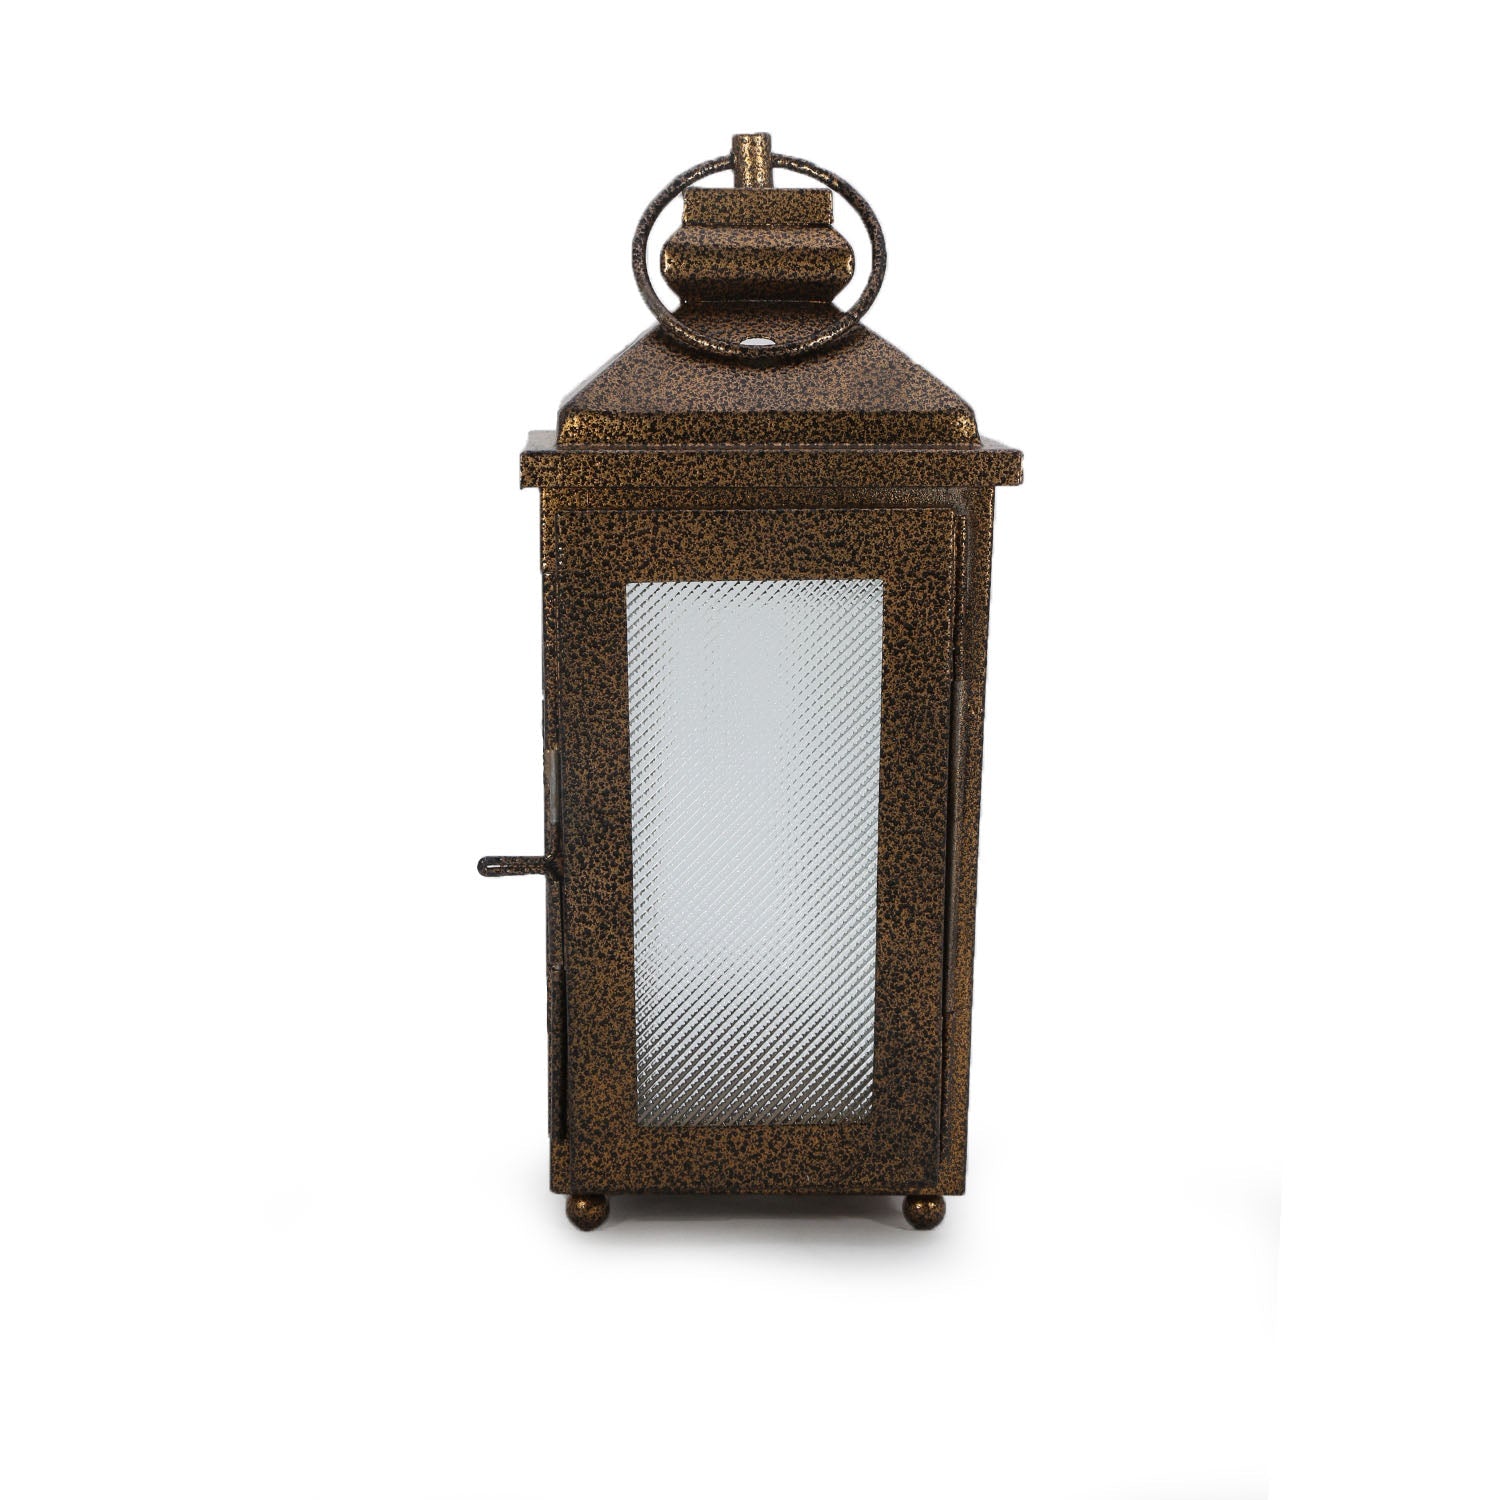 Rustic Brass Finished Moroccan Candle Lantern - Classic Design - Stylla London